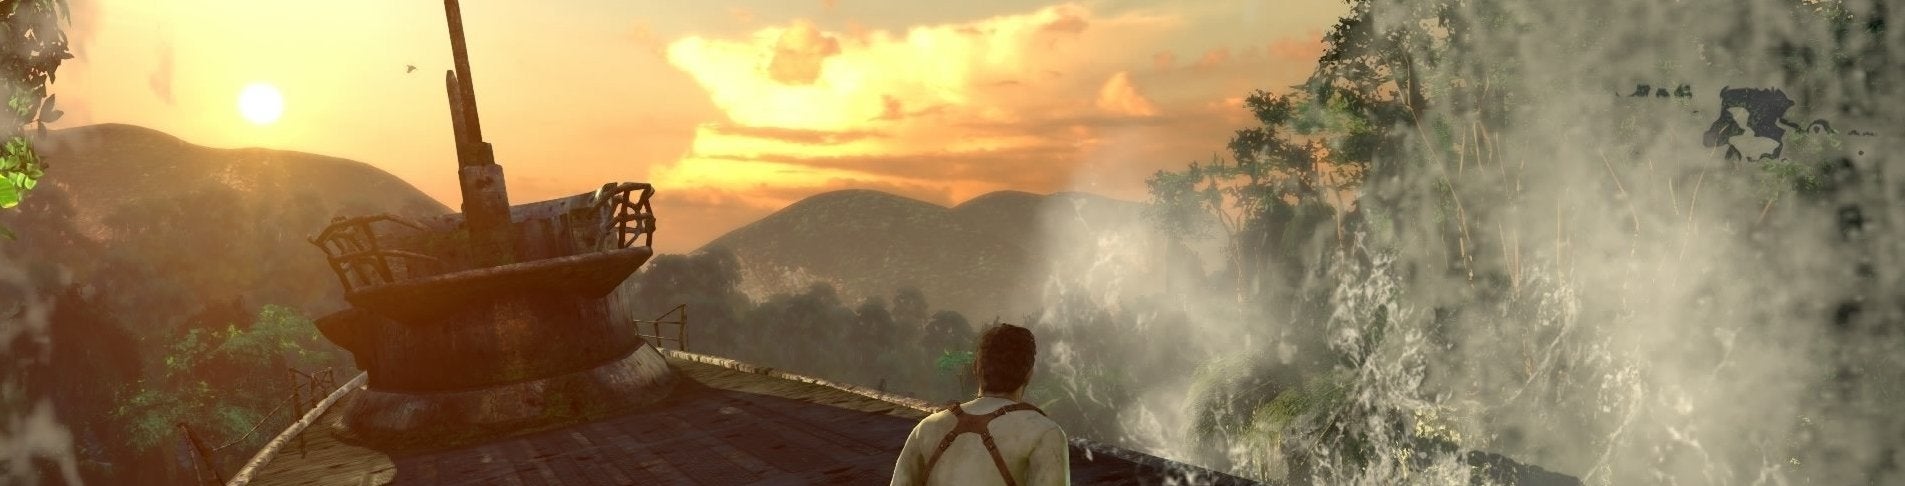 Afbeeldingen van Uncharted: The Nathan Drake Collection review